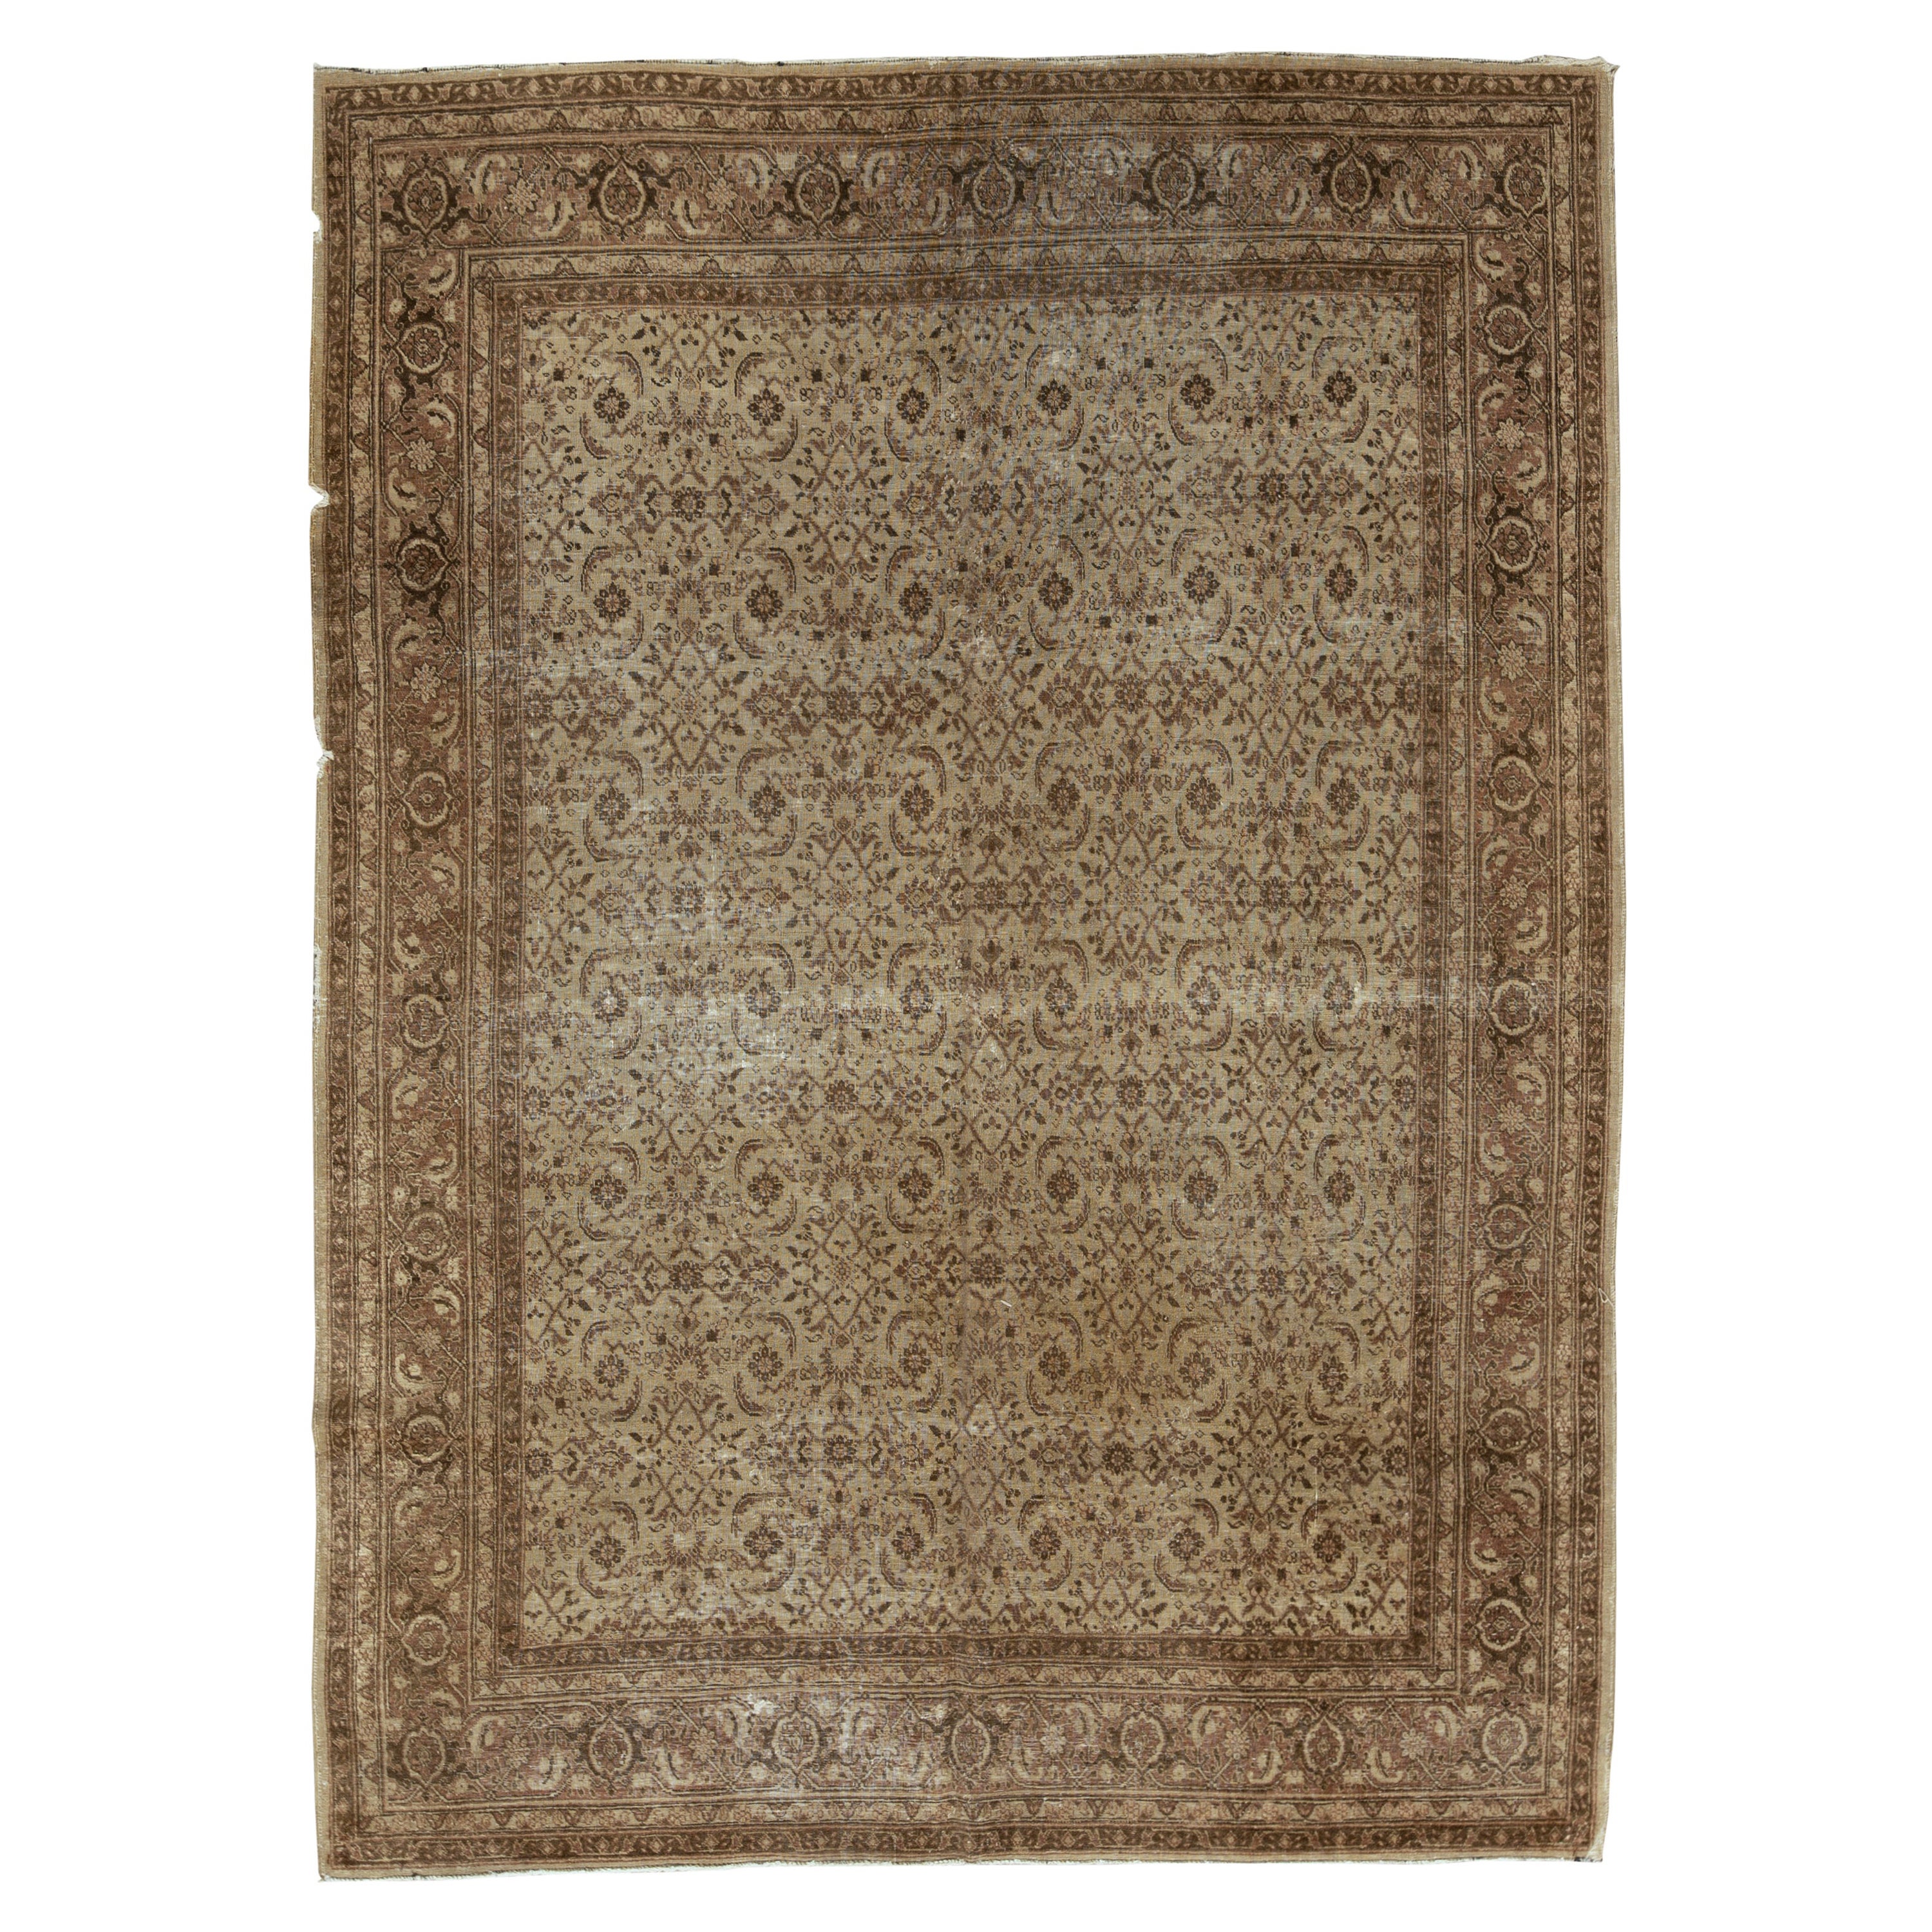   Antique Persian Fine Traditional Handwoven Luxury Wool Ivory / Rust Rug